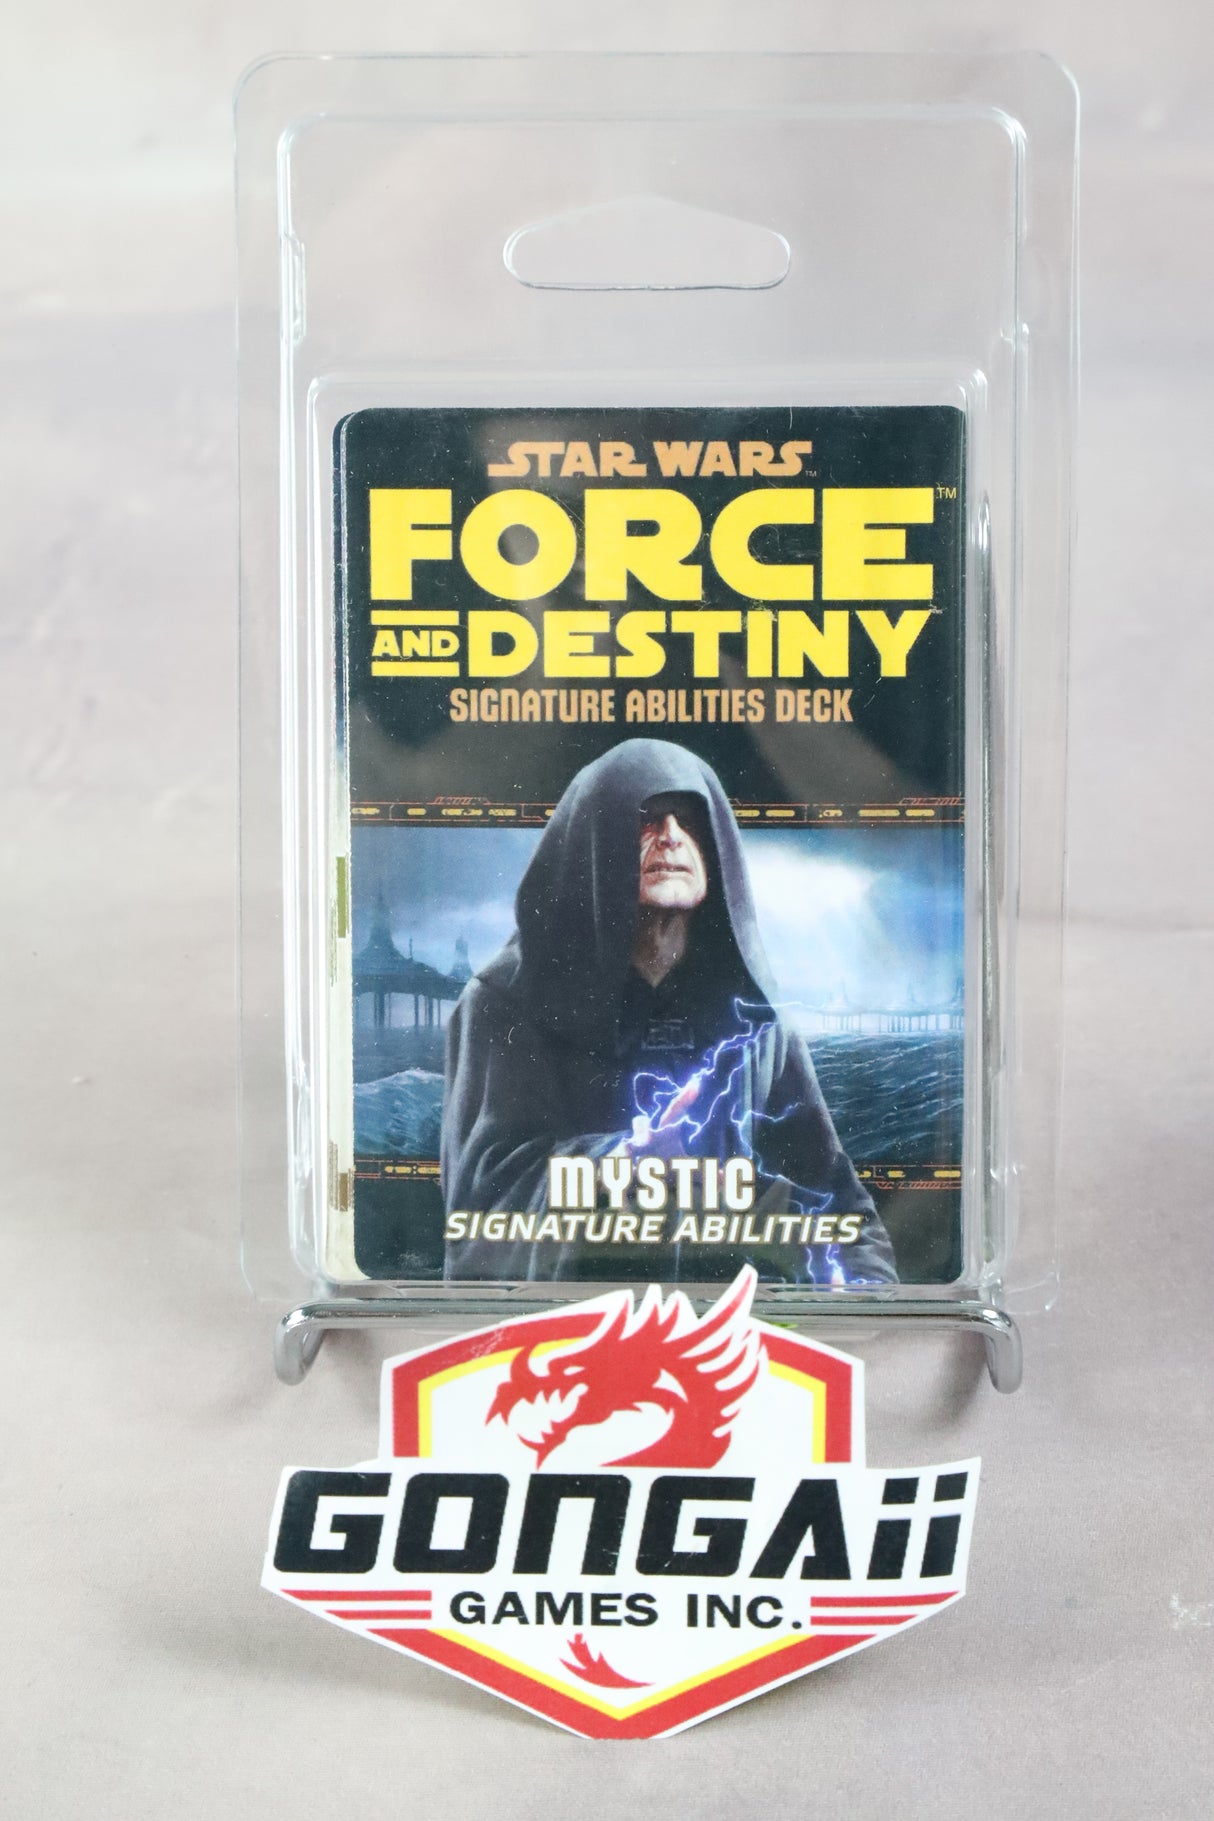 Star Wars RPG: Force and Destiny - Mystic Signature Abilities Specialization Dec